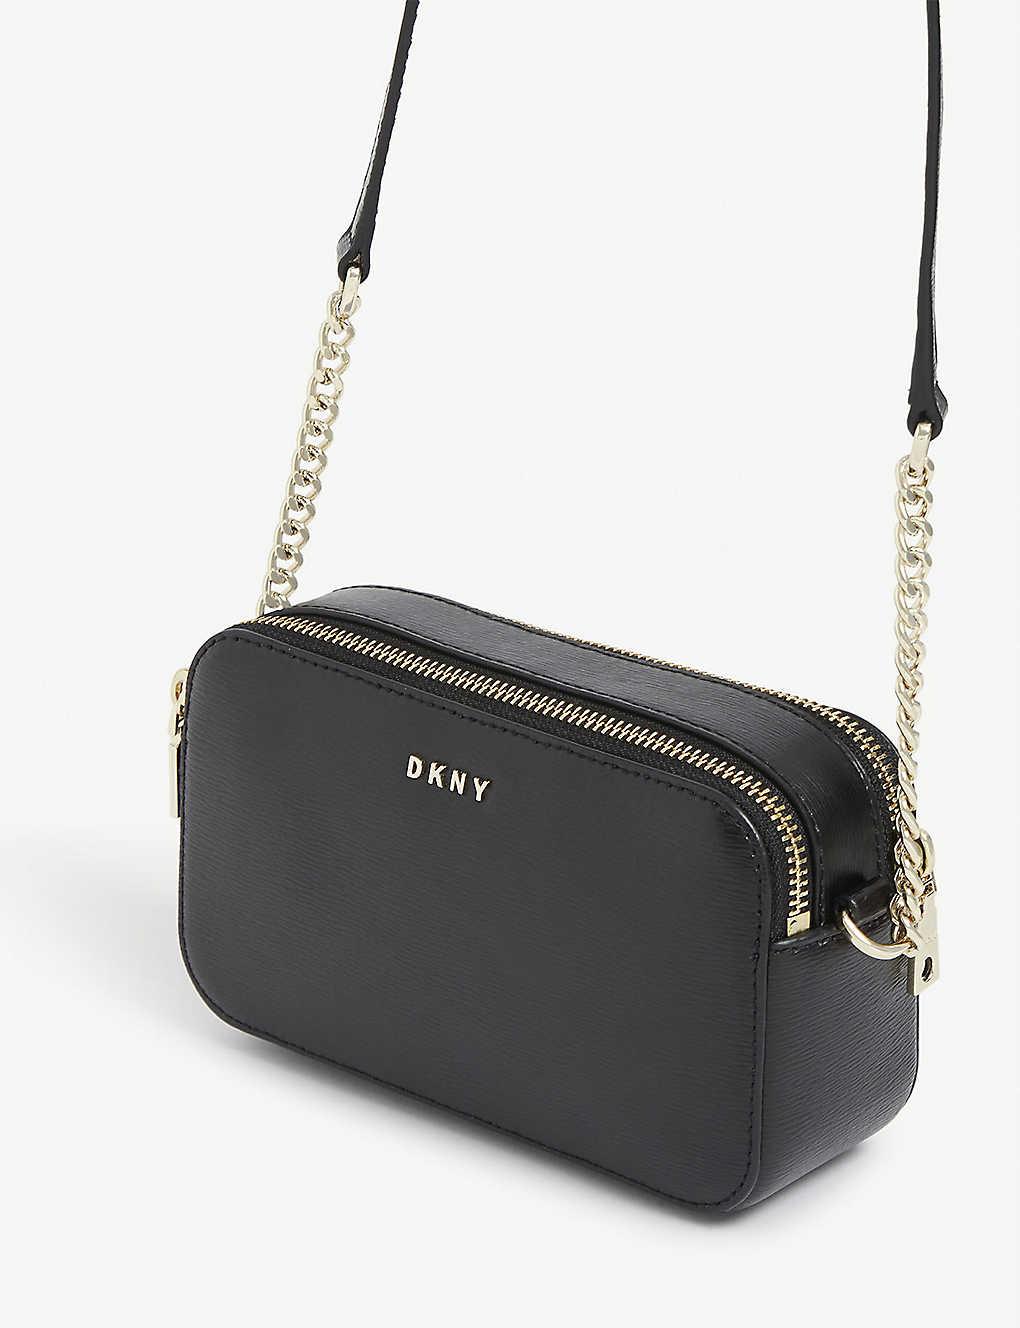 DKNY Bryant Double-zip Leather Camera Bag in Black | Lyst